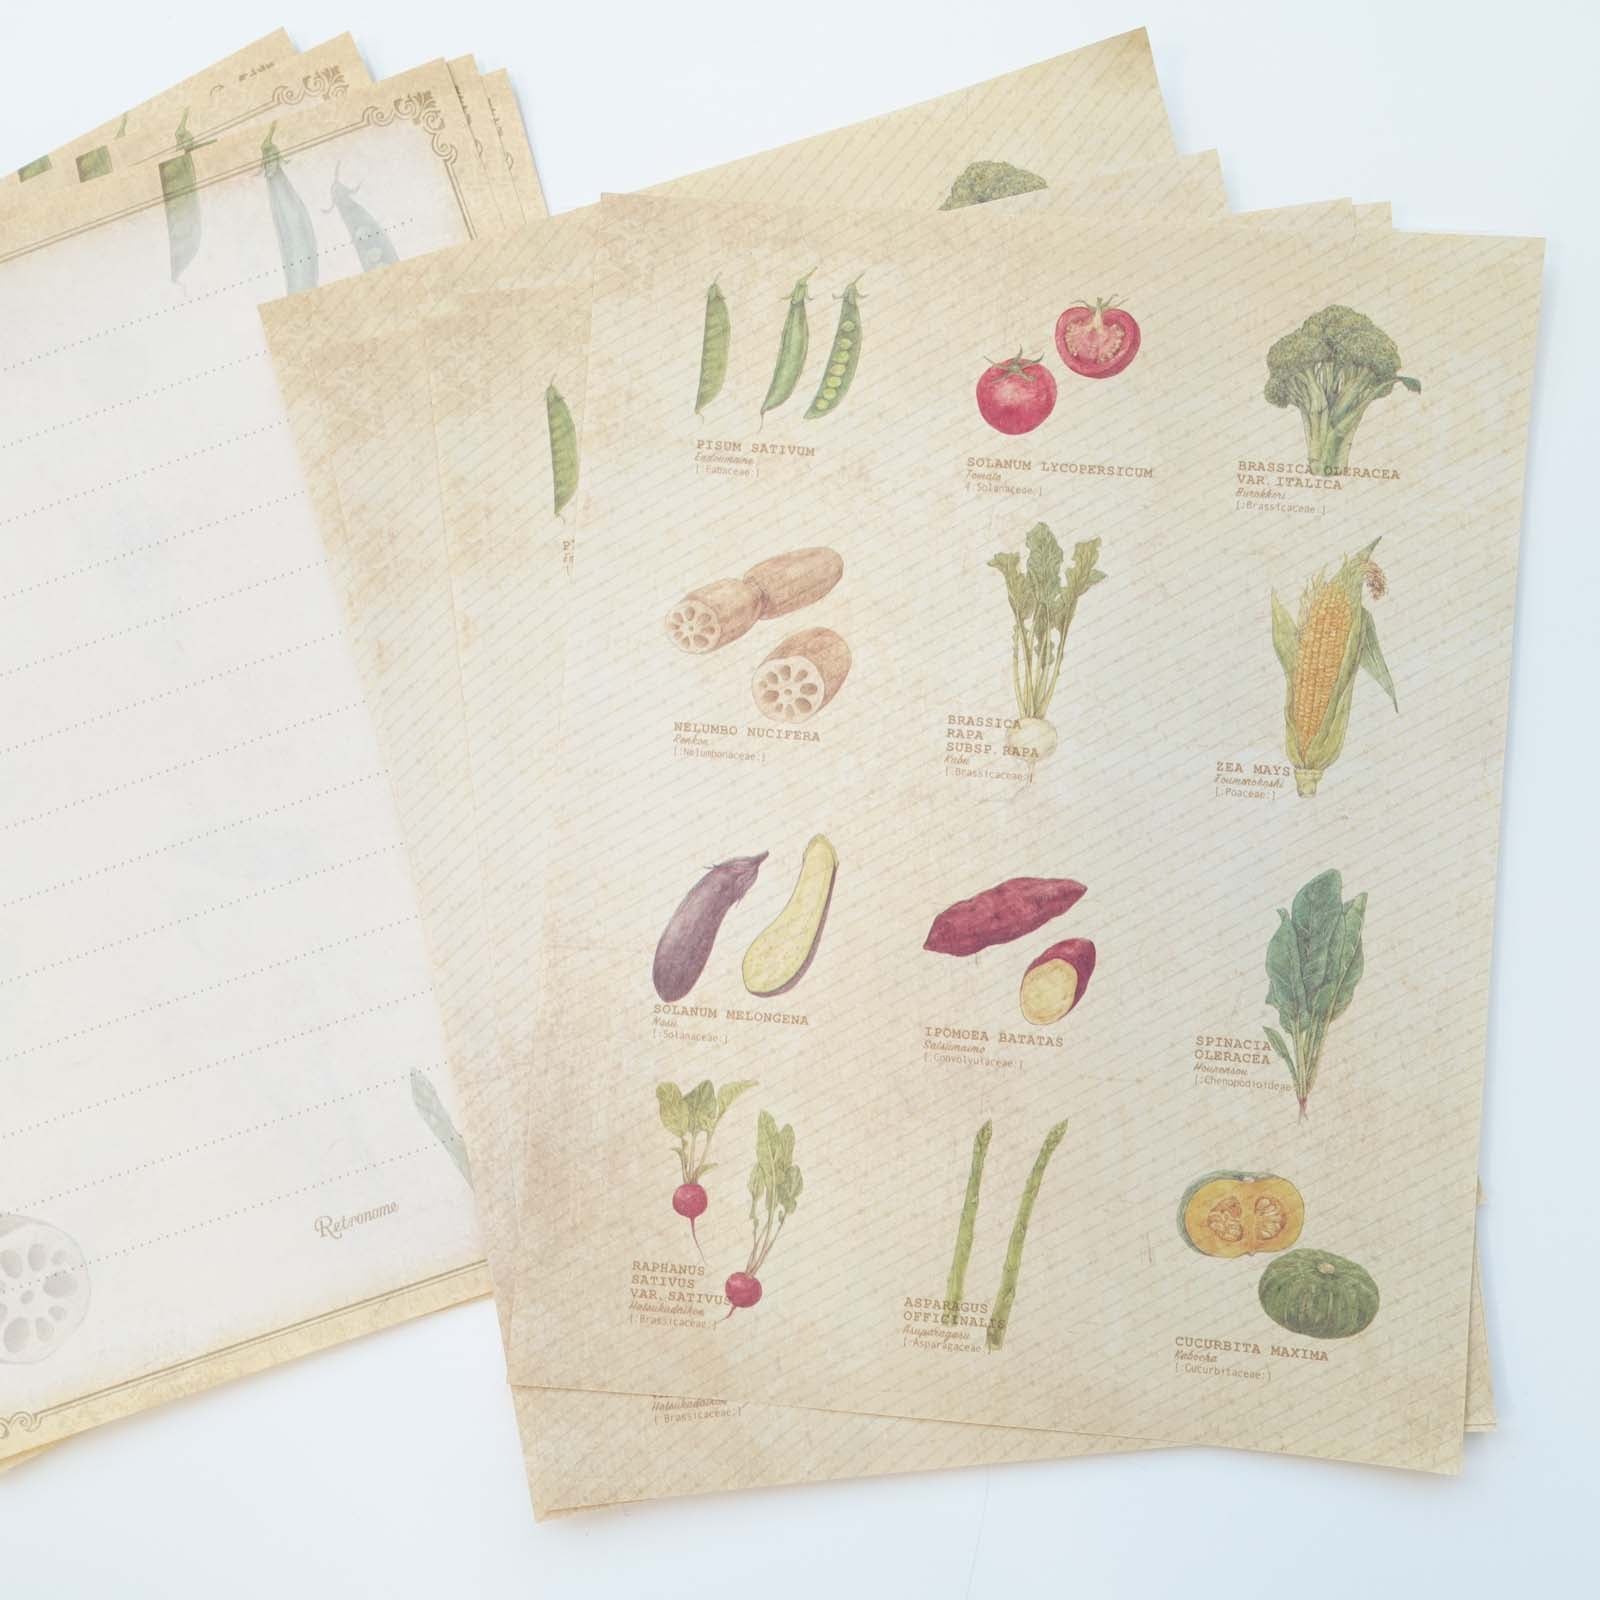 Vintage style premium, double sided, letter writing set featuring vegetable illustrations